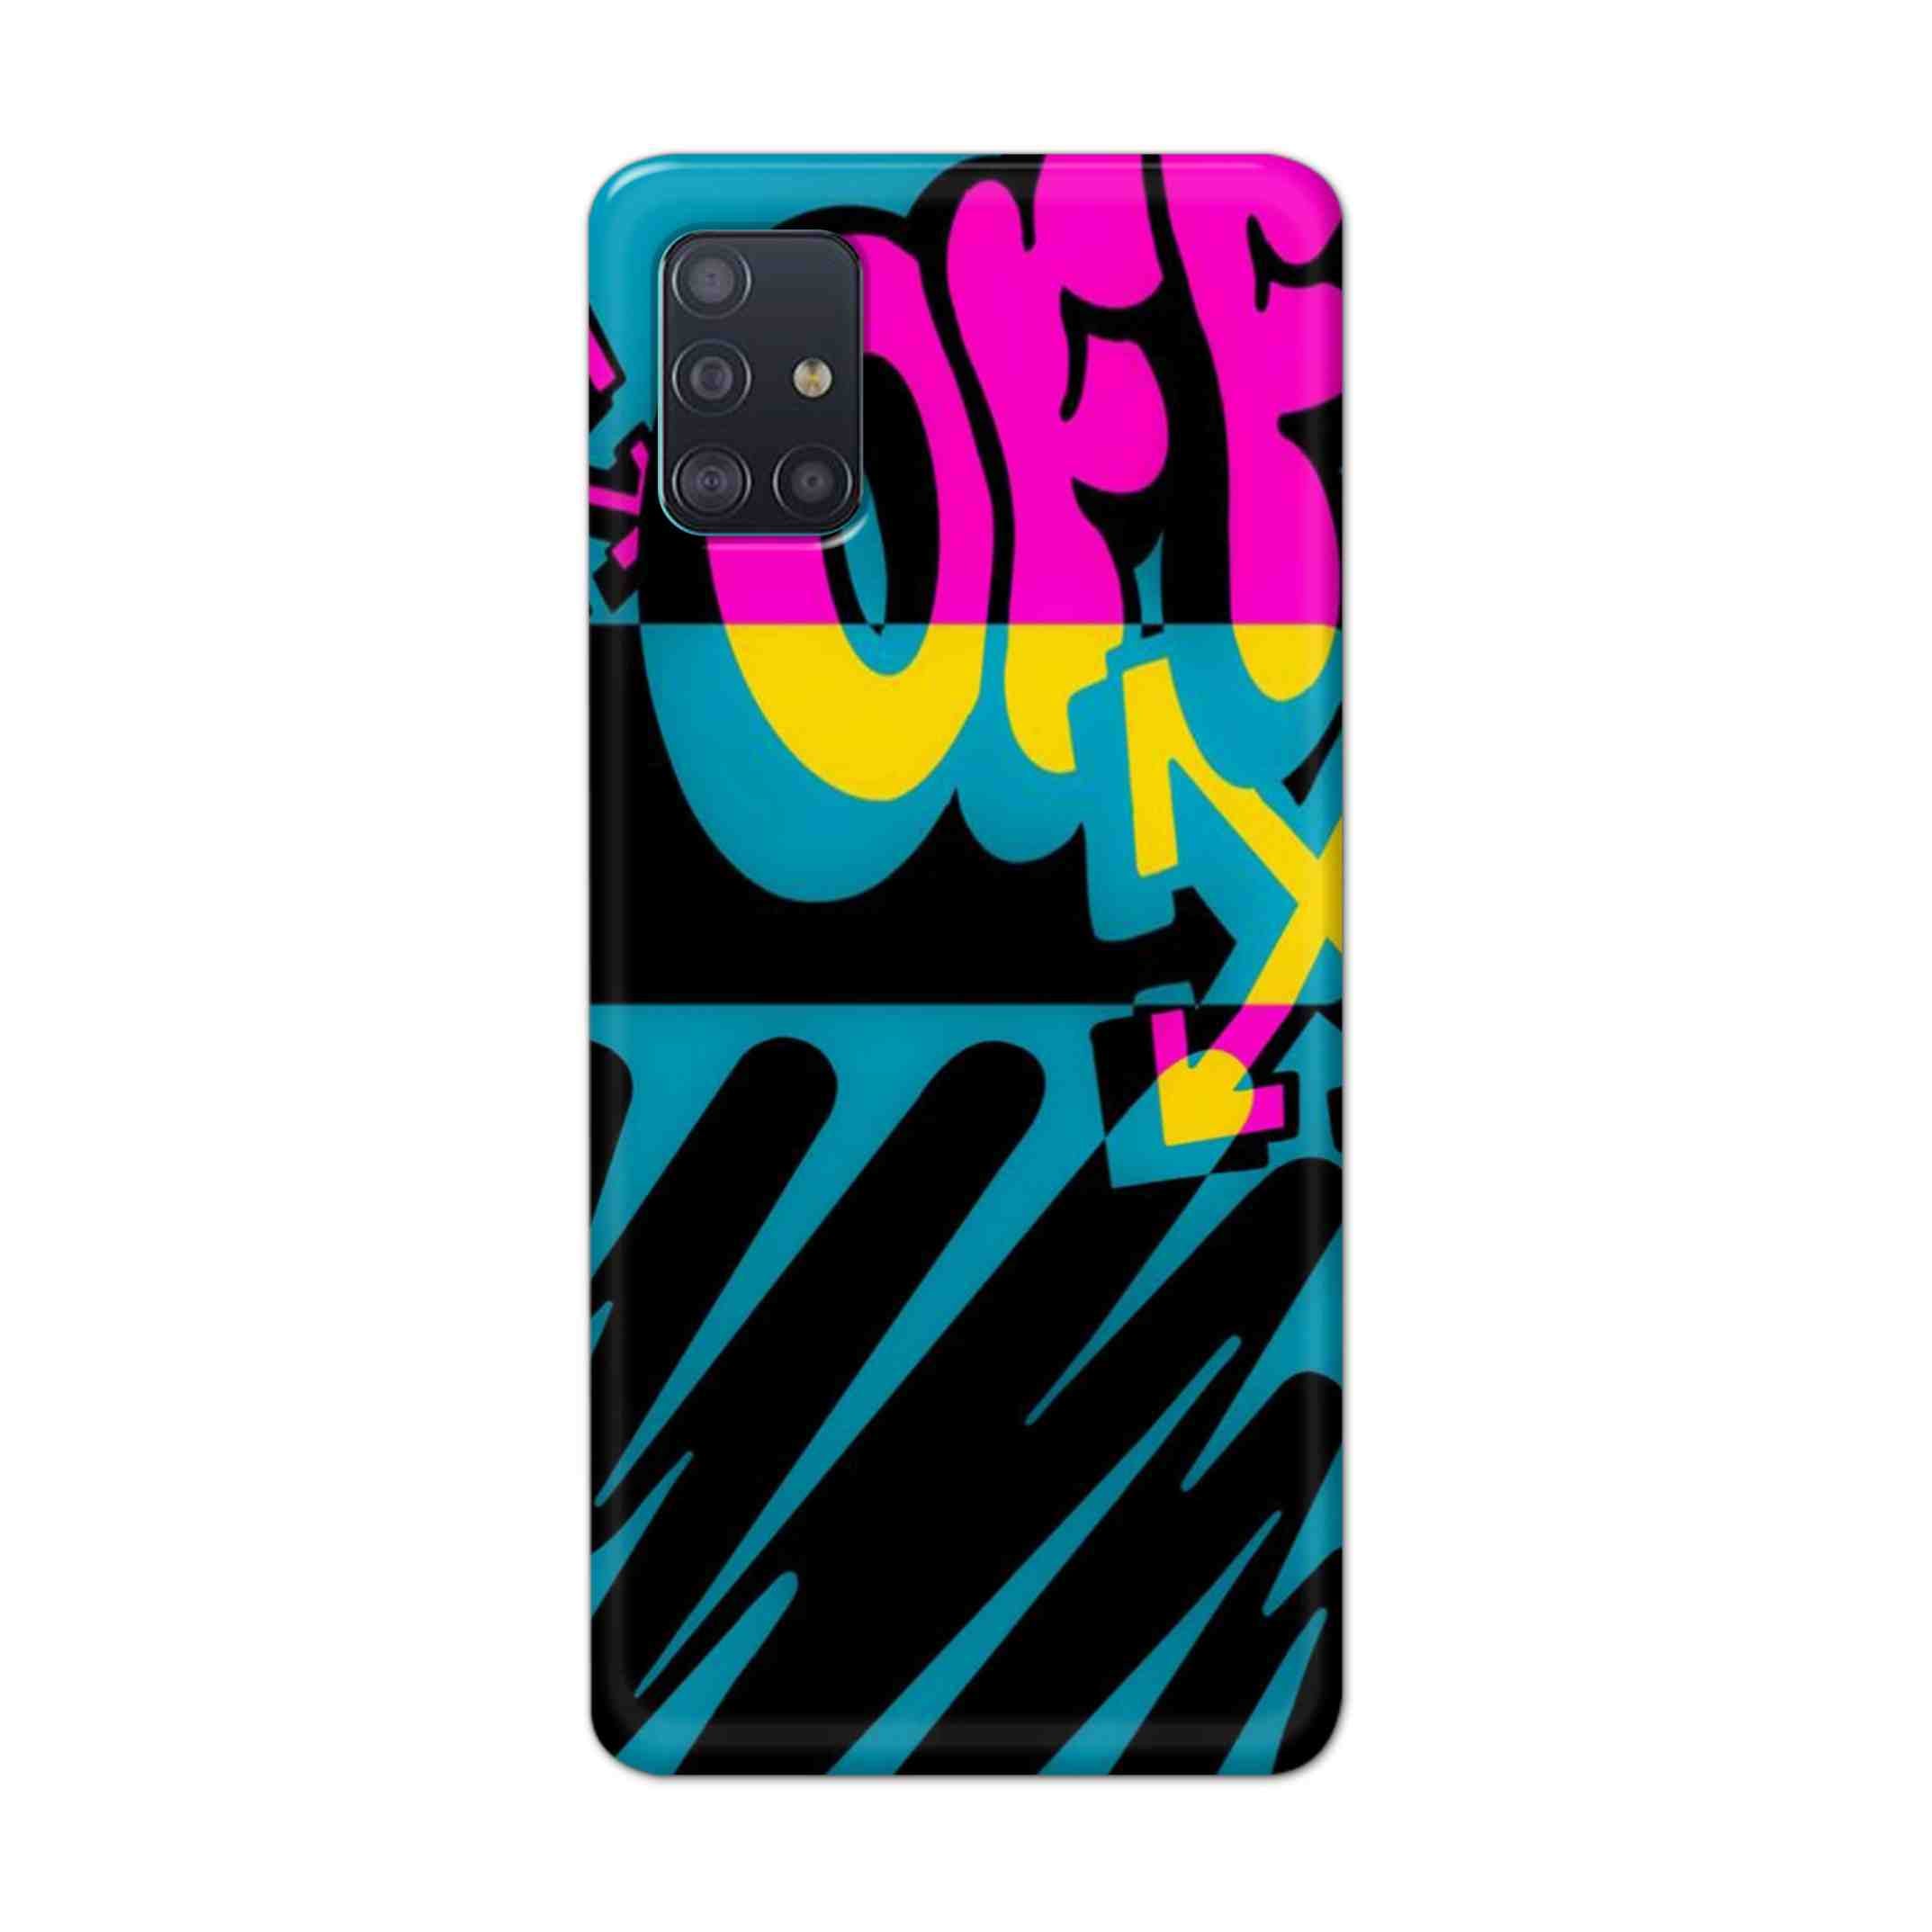 Buy Off Hard Back Mobile Phone Case Cover For Samsung Galaxy A71 Online